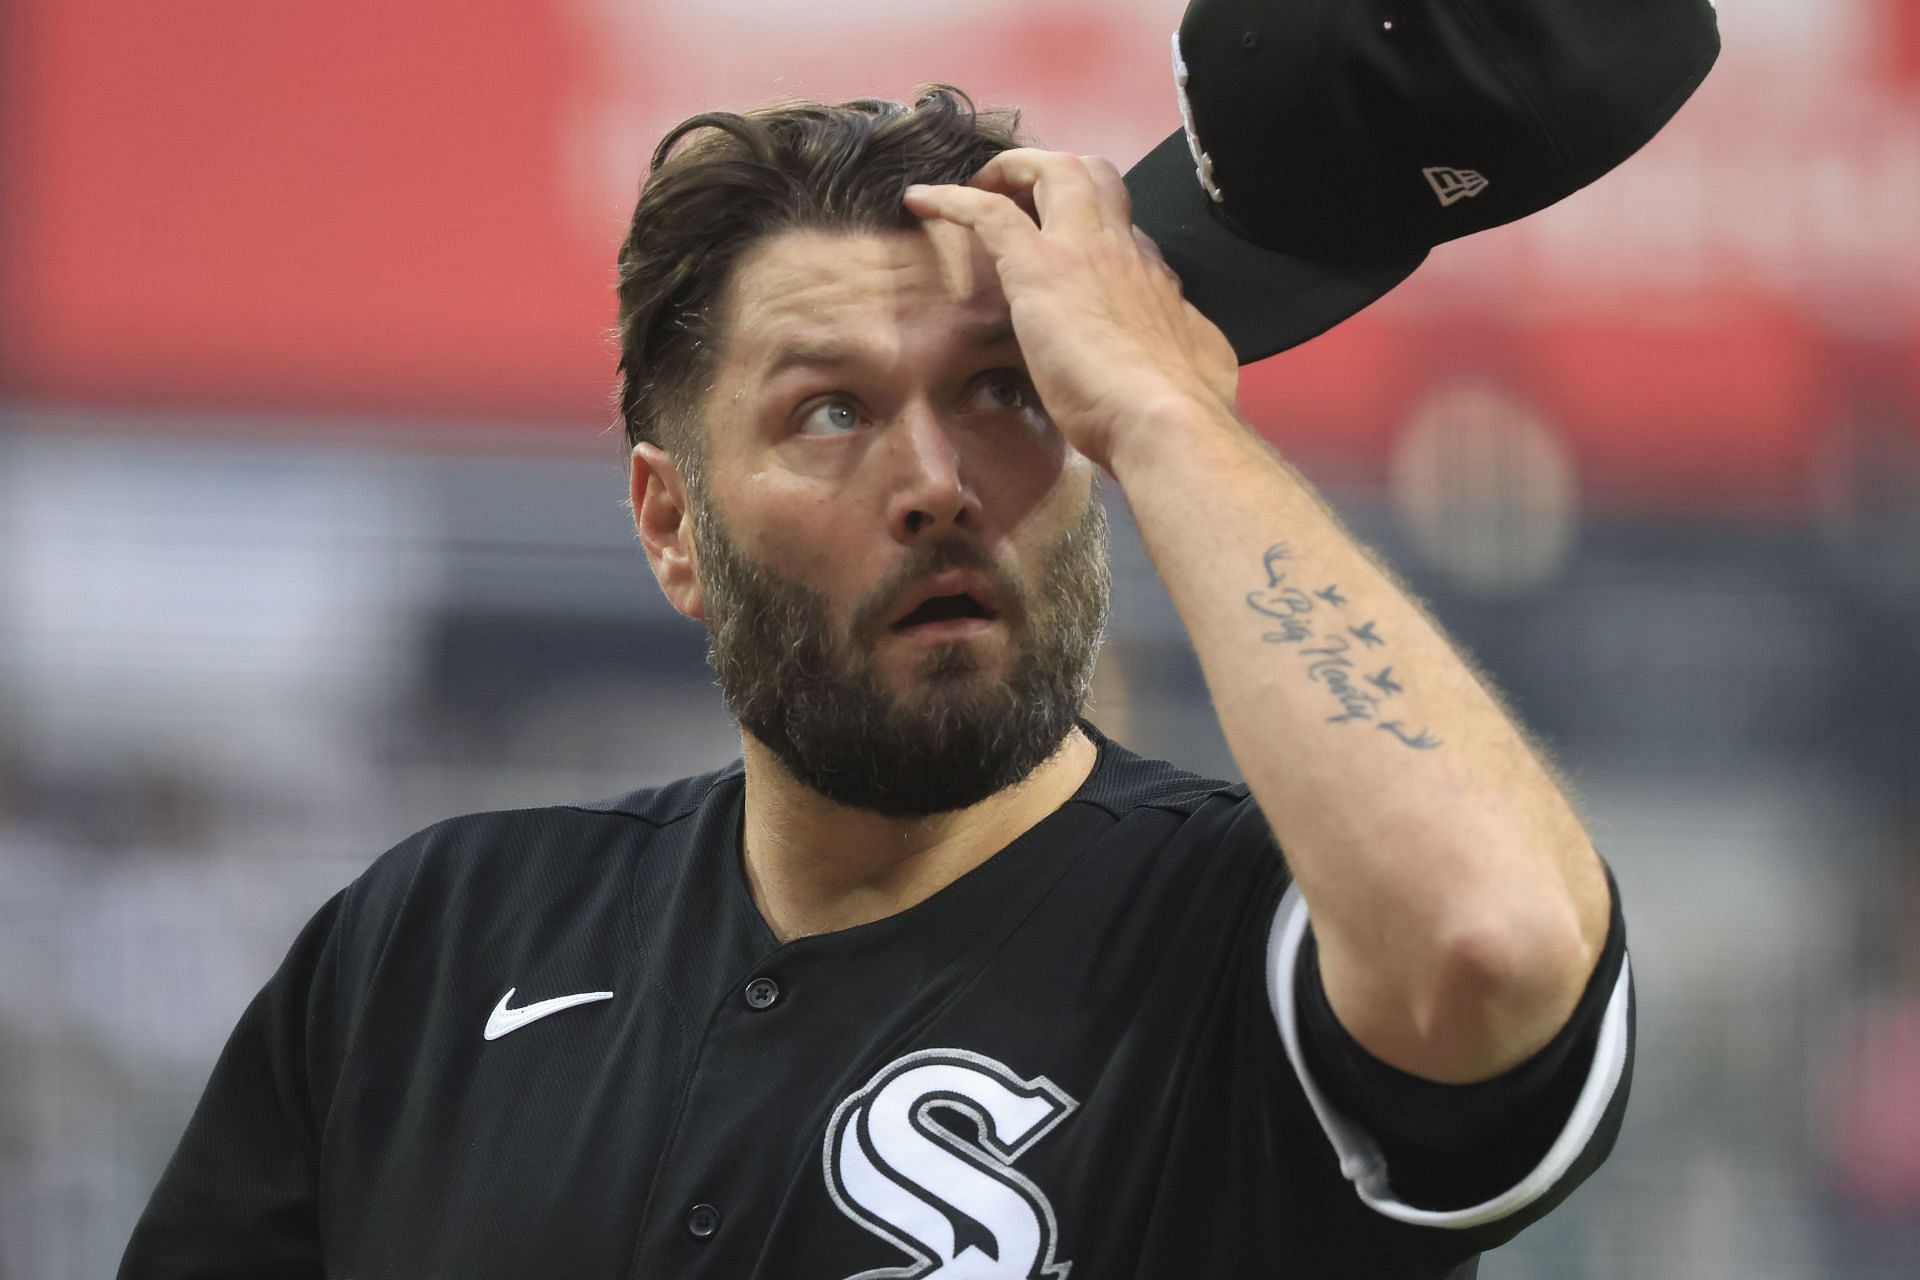 Lance Lynn goes to White Sox as Yankees play risky rotation game